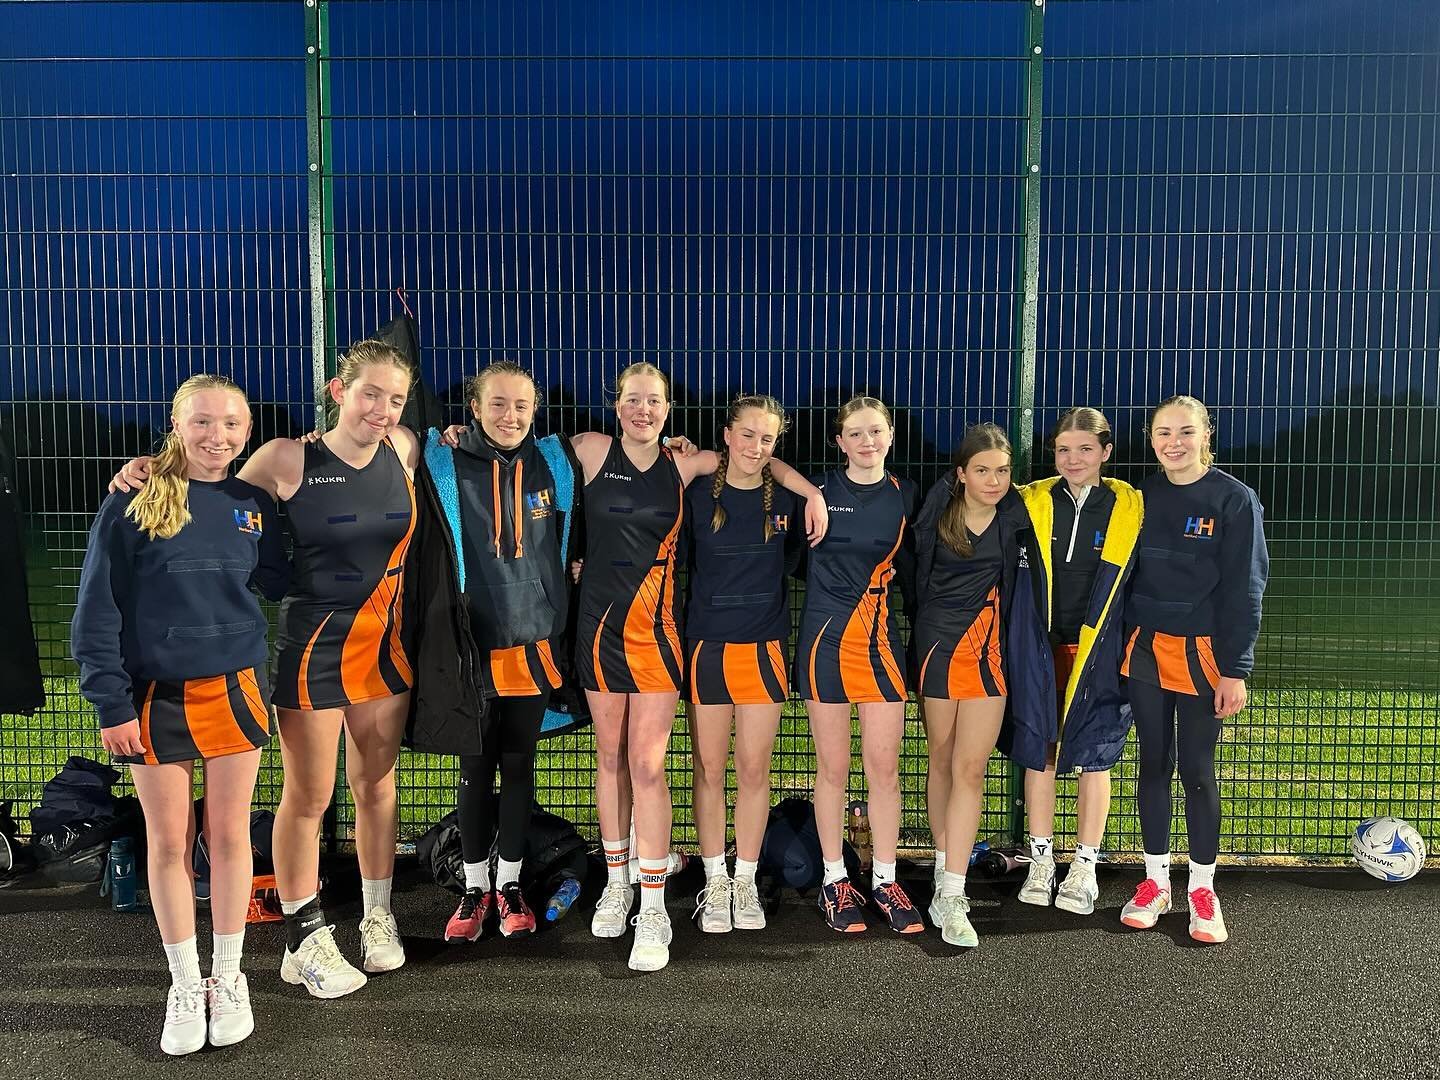 U13s played this evening - Navys v Wodson Aqua winning 29-13, Oranges playing Swan 2 (U14s) winning 48-18. Low on numbers this evening, so 3 players played in both matches to help the Orange team out. Thanks to everyone who helped to make sure these 